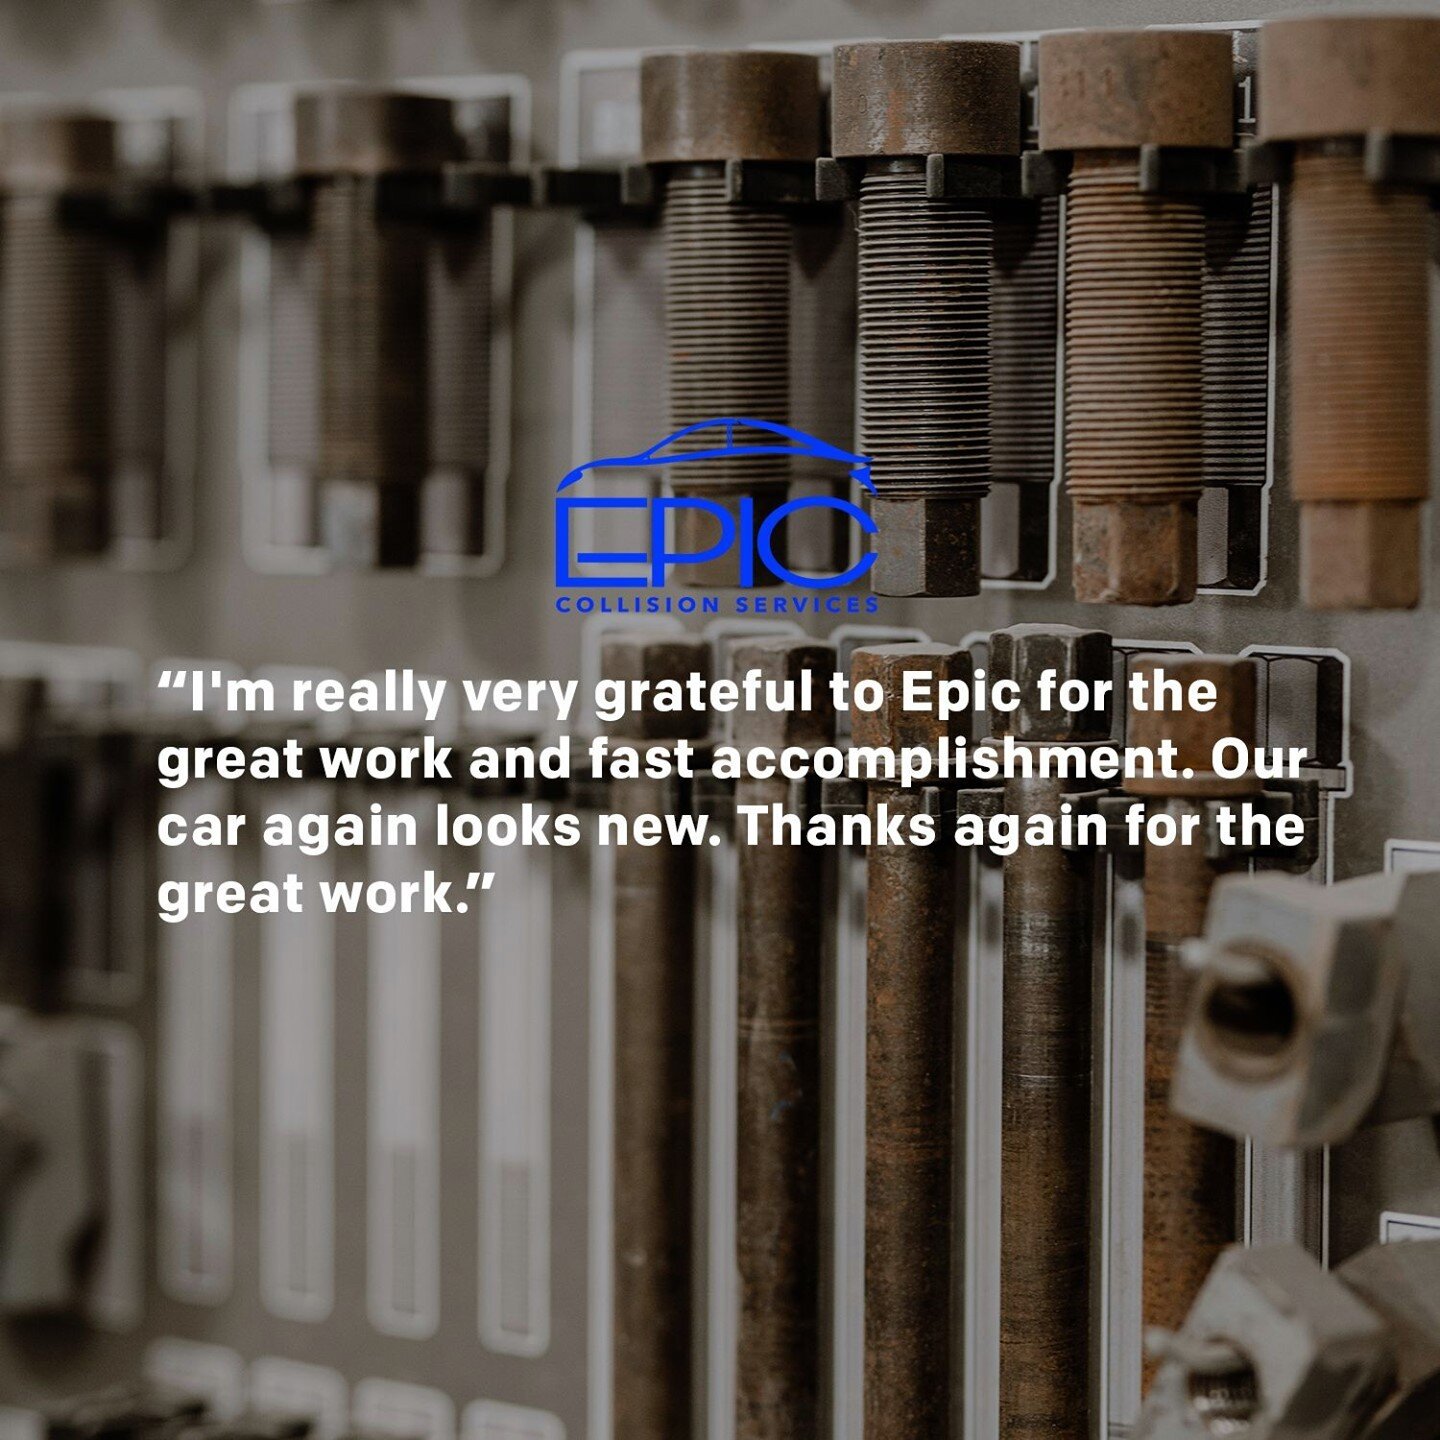 Read this recent review left by a customer. At Epic Collision Services we strive for customer satisfaction each and every time.